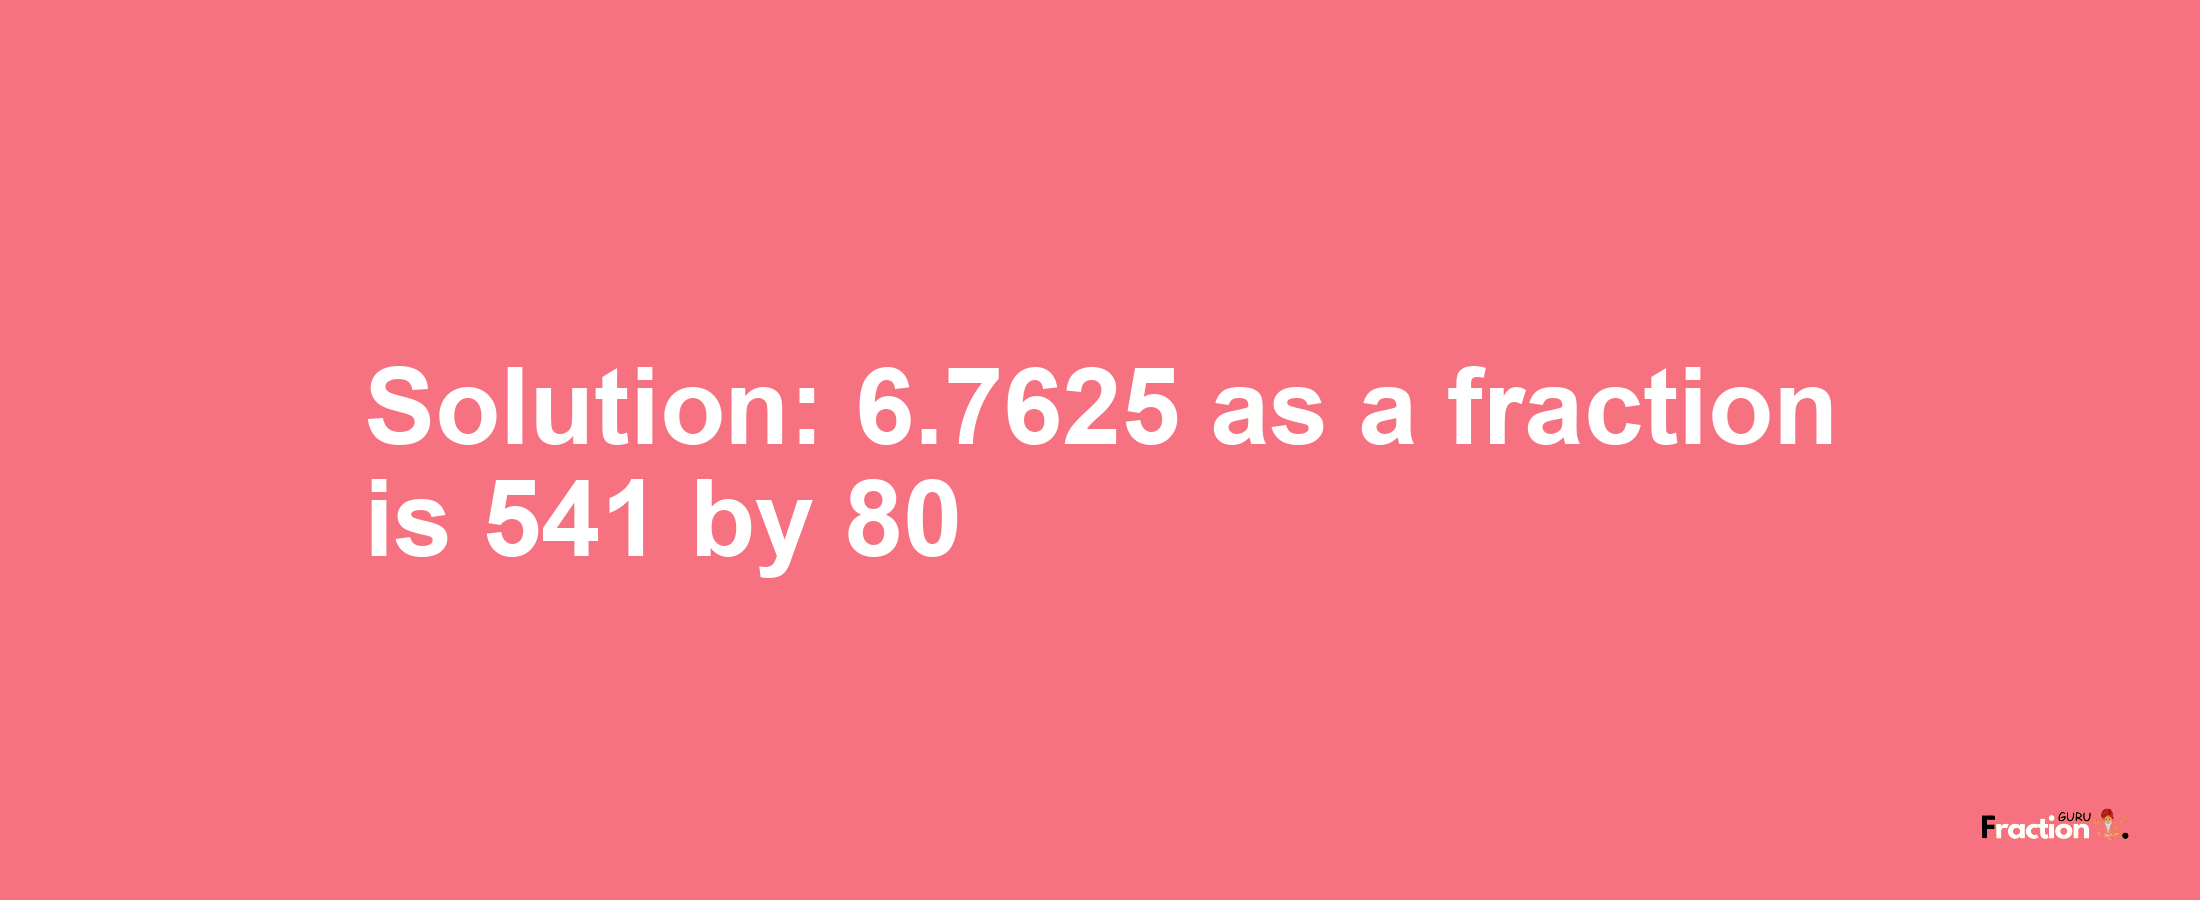 Solution:6.7625 as a fraction is 541/80